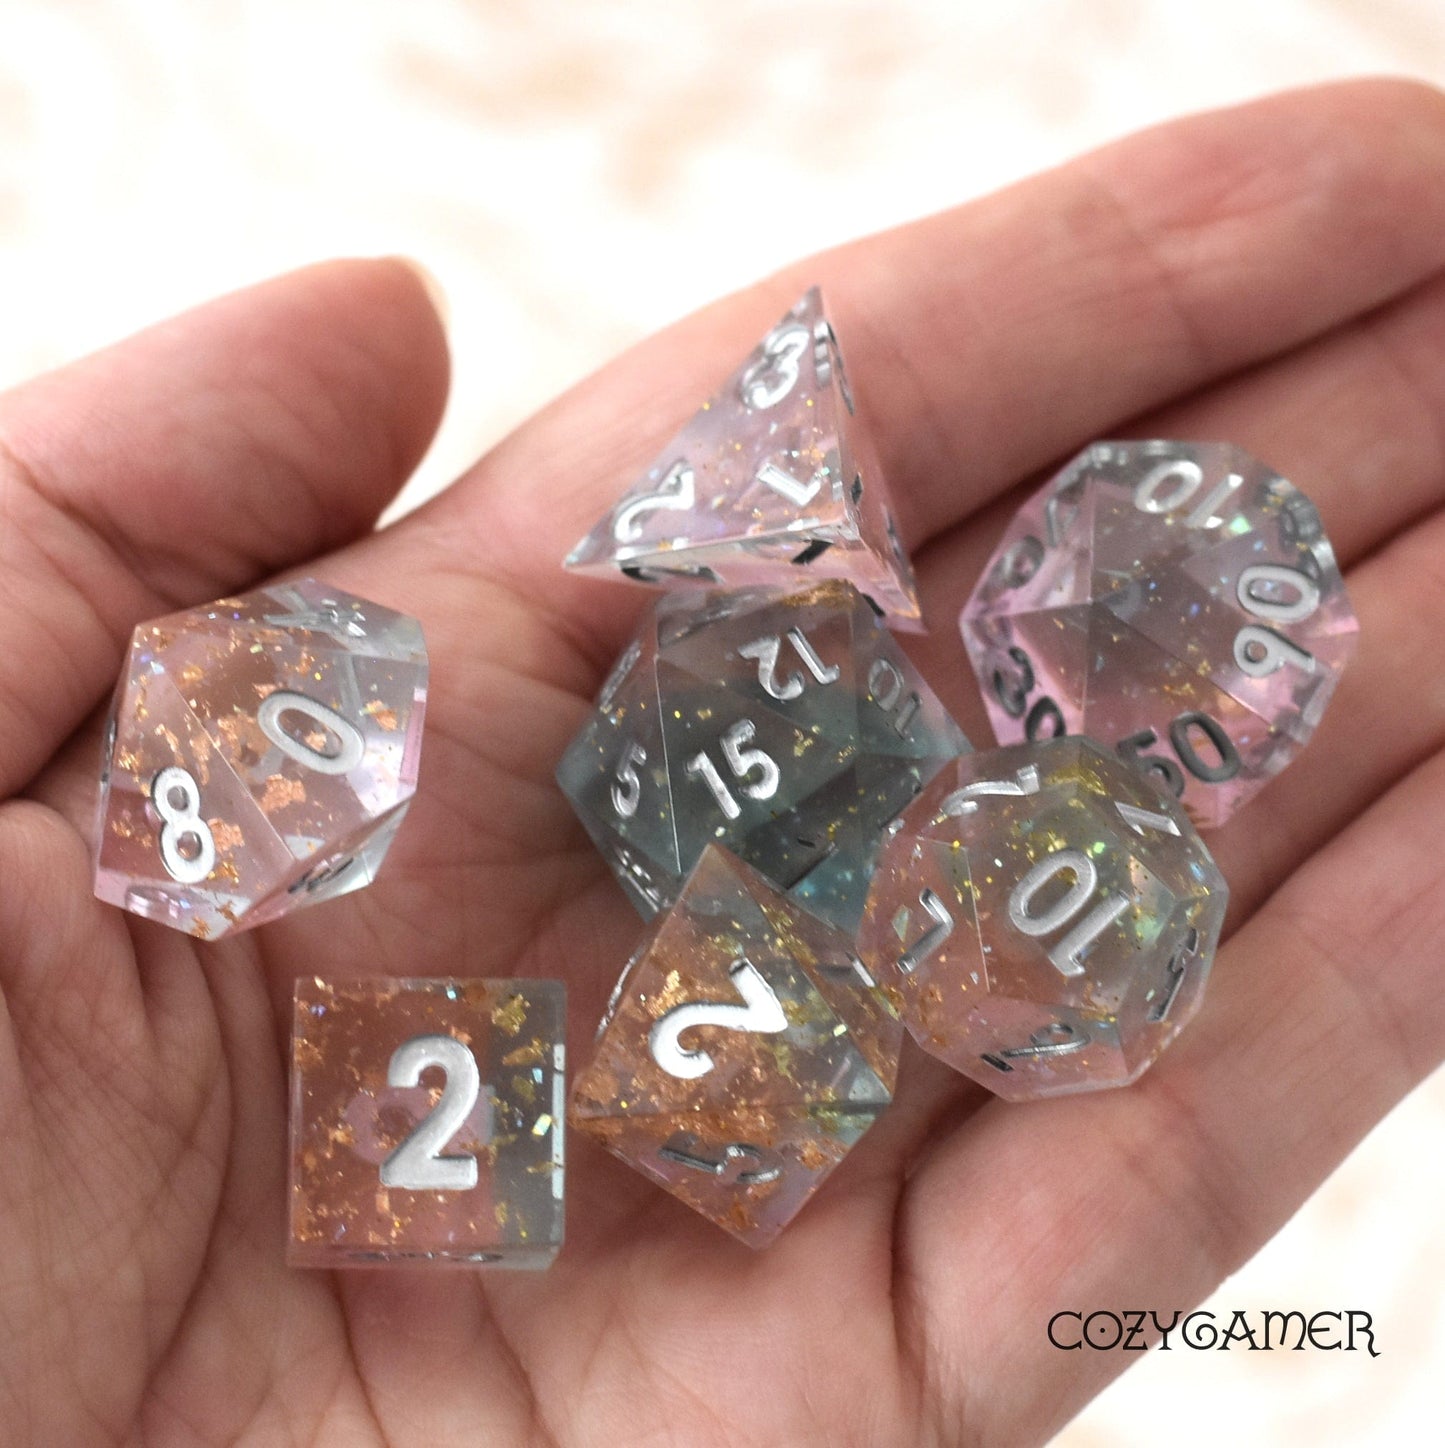 Dream Palace Sharp Edge Dice Set. Layered Pink and Blue Clear resin with copper foil and opal flakes